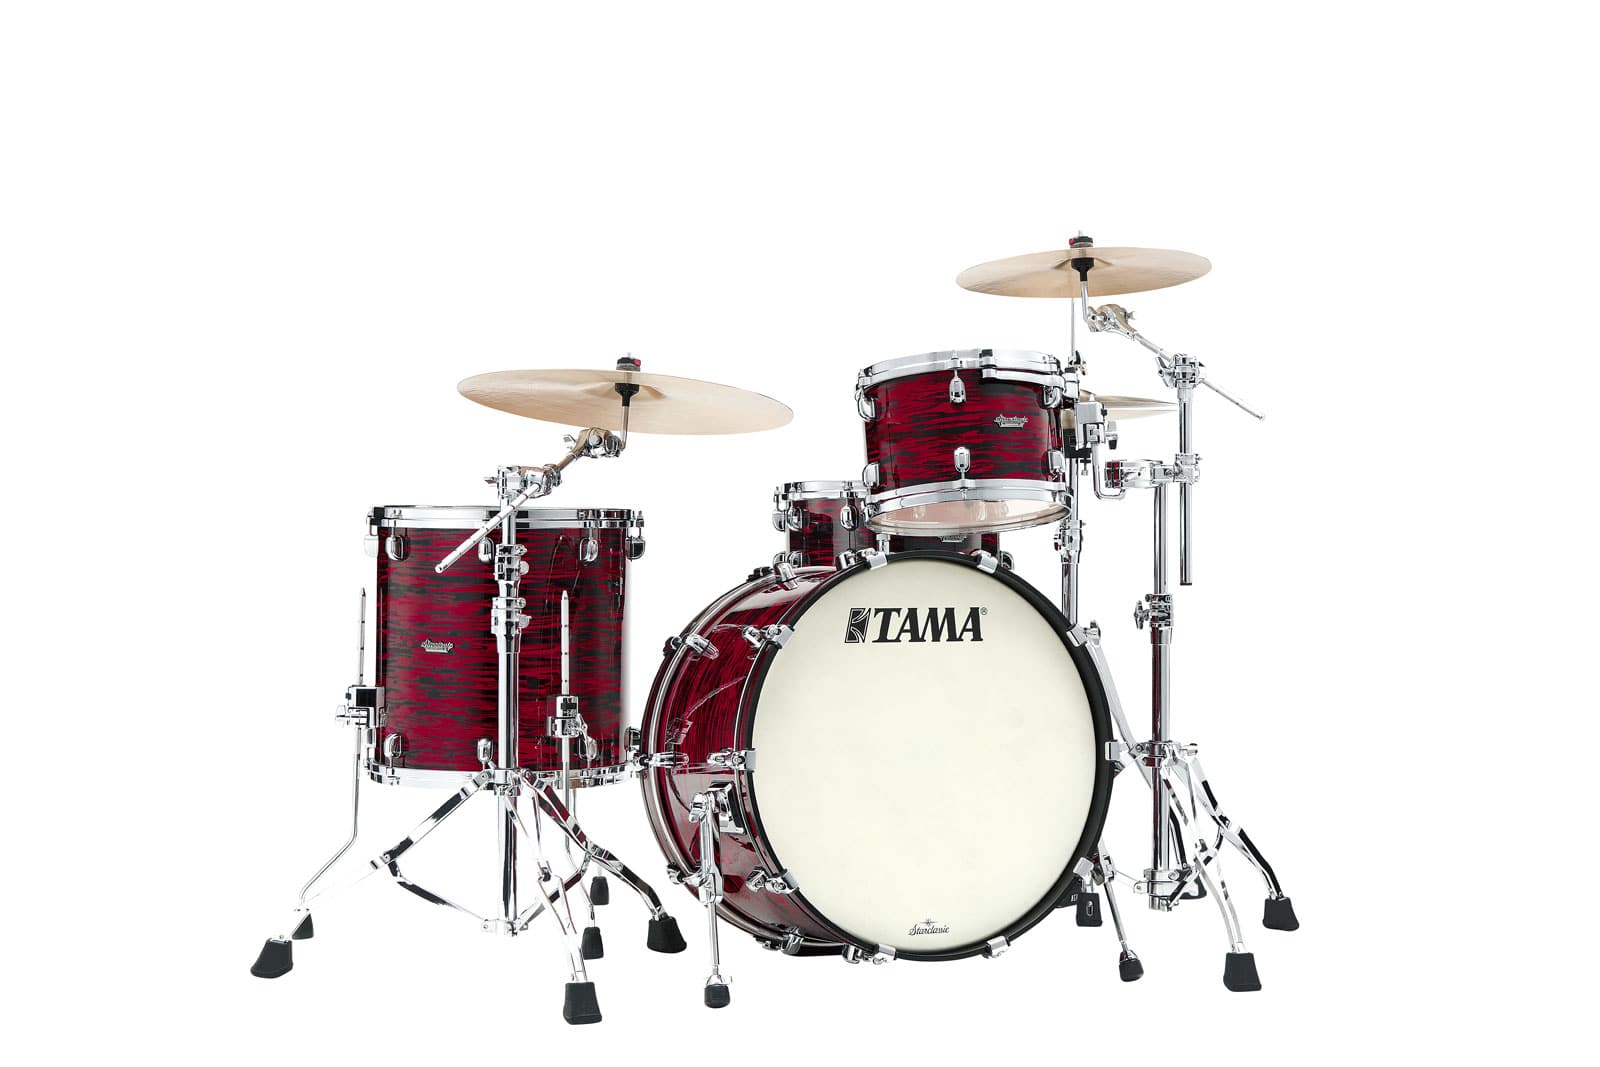 TAMA STARCLASSIC MAPLE ROCK 22 DRUM KIT, CHROME SHELL HARDWARE RED OYSTER